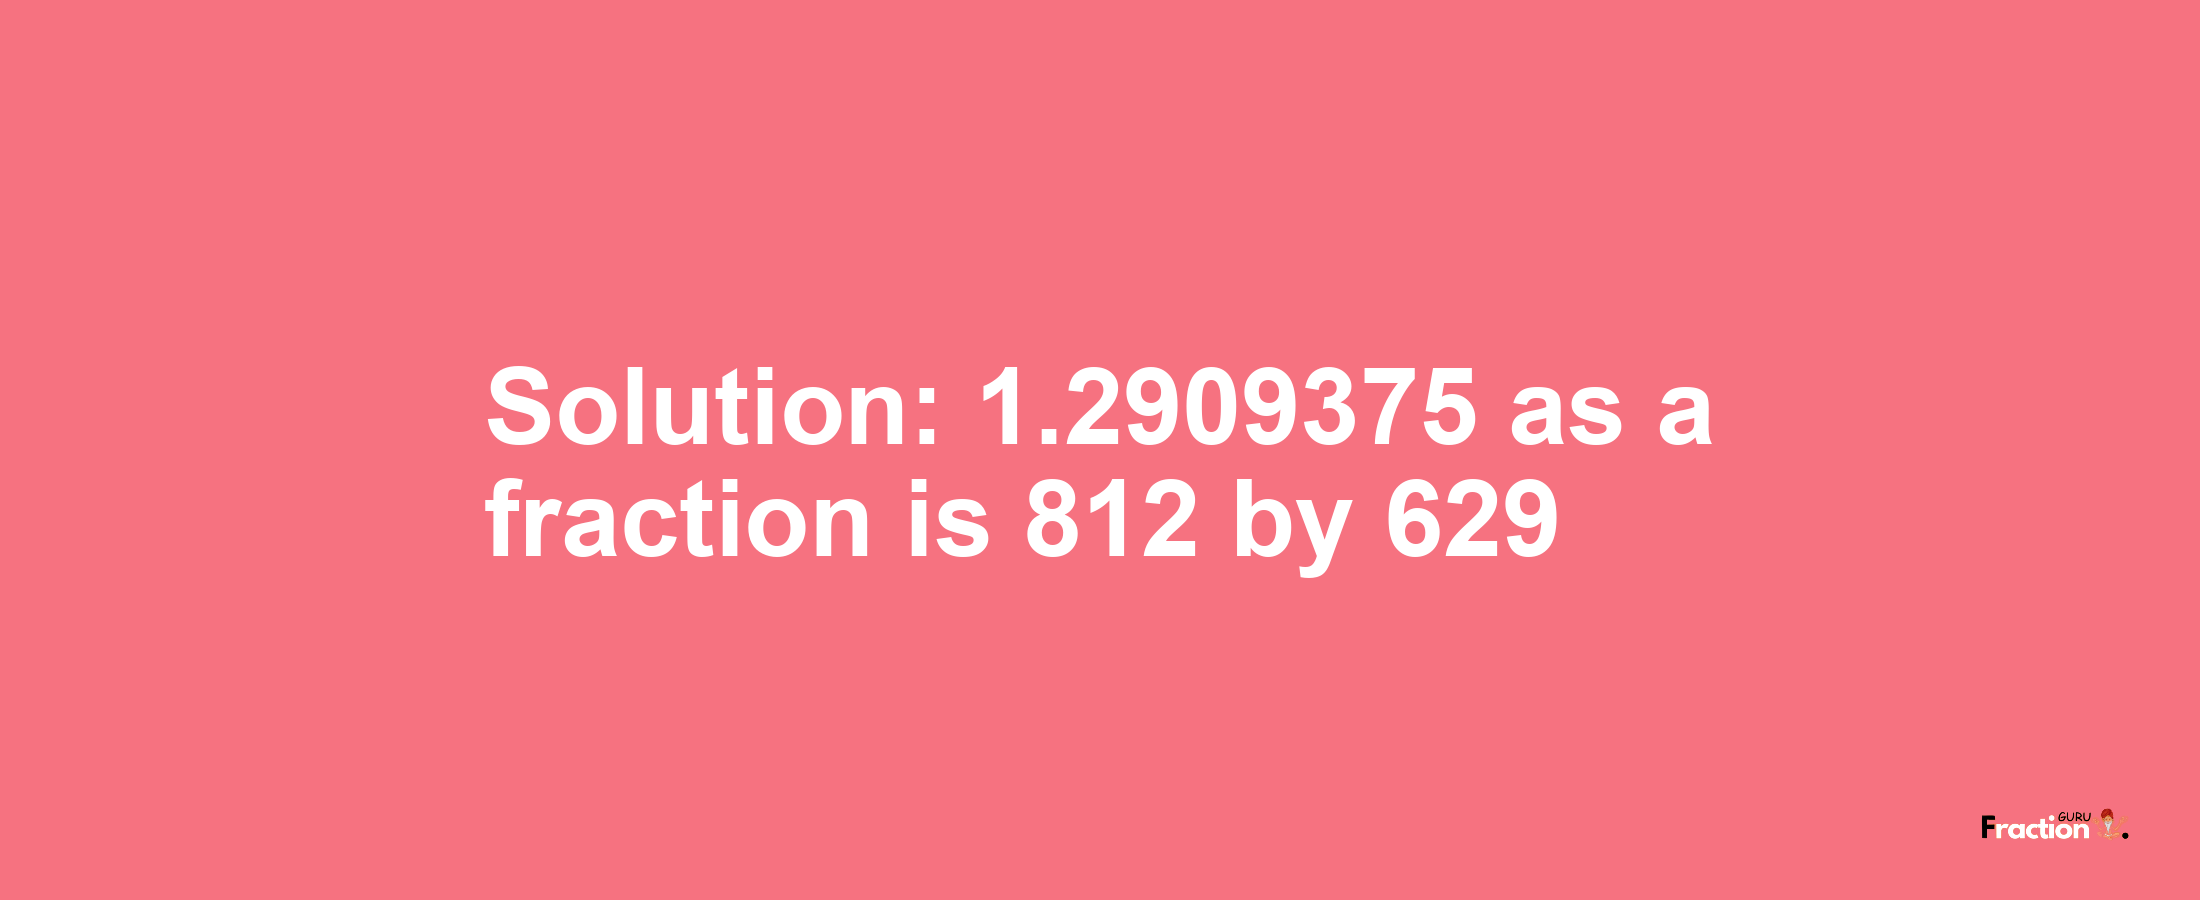 Solution:1.2909375 as a fraction is 812/629